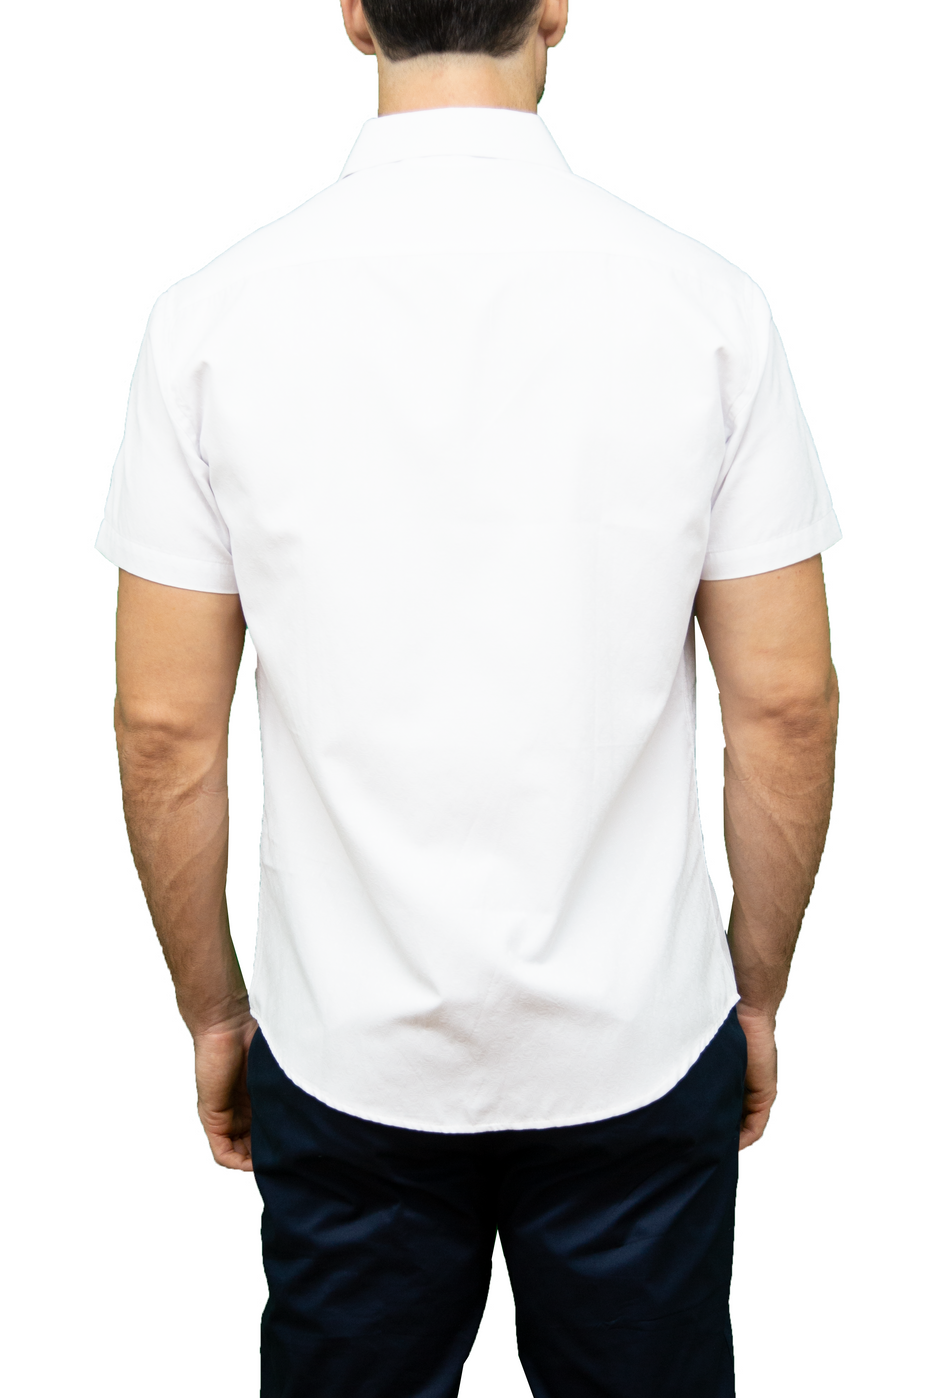 Men's Solid White Short Sleeve Button Up